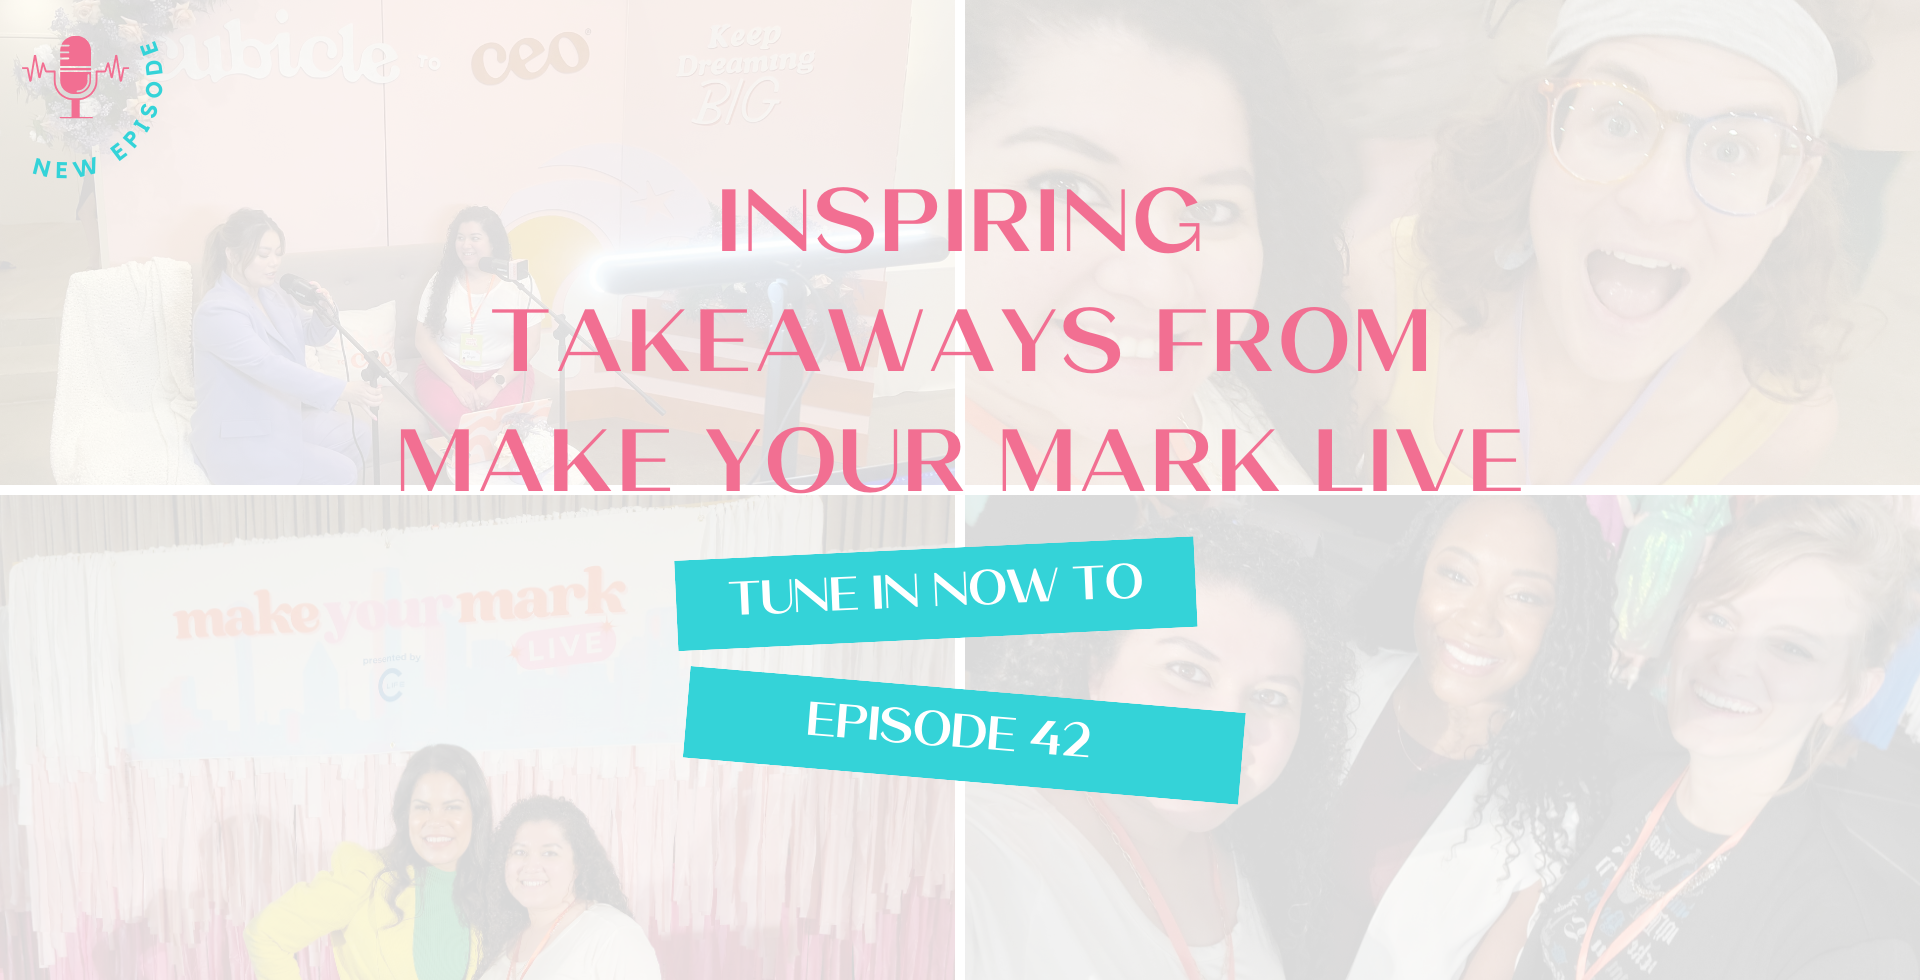 episode 42 - inspiring takeaways from make your mark live